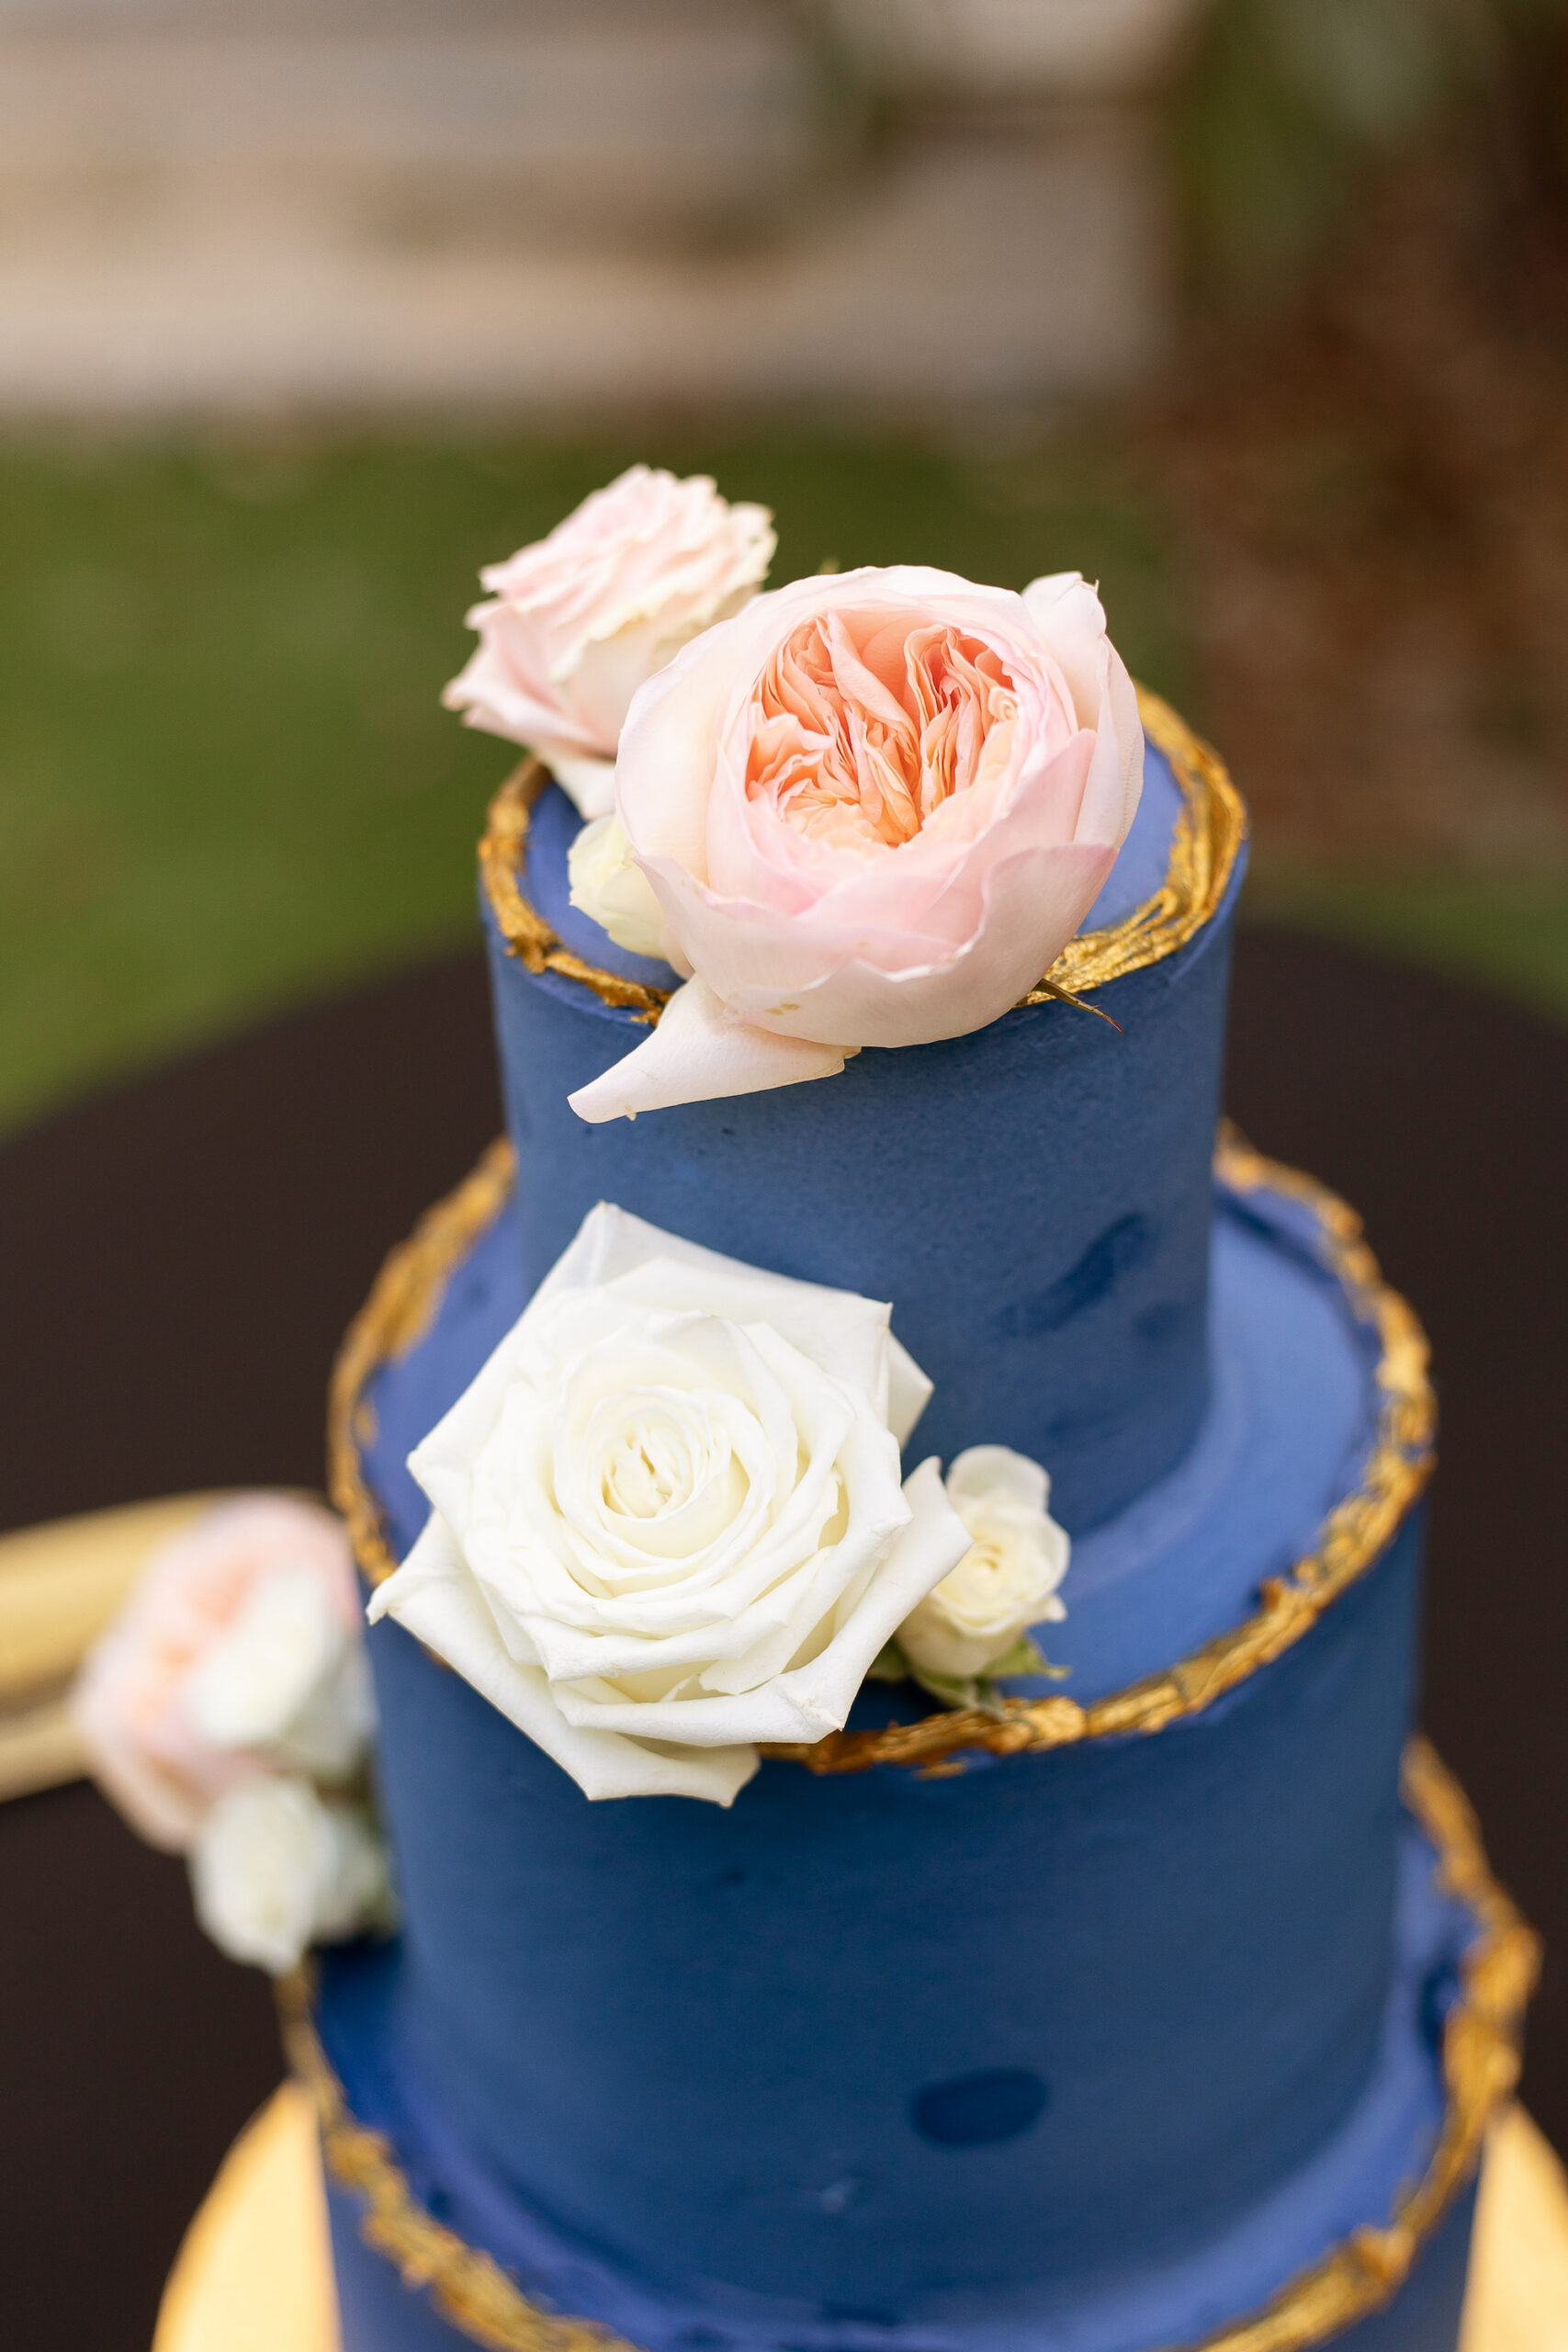 Three-tiered Dark Blue and Gold Wedding Cake Inspiration with Pink and White Garden Roses | Unique Wedding Cake Ideas